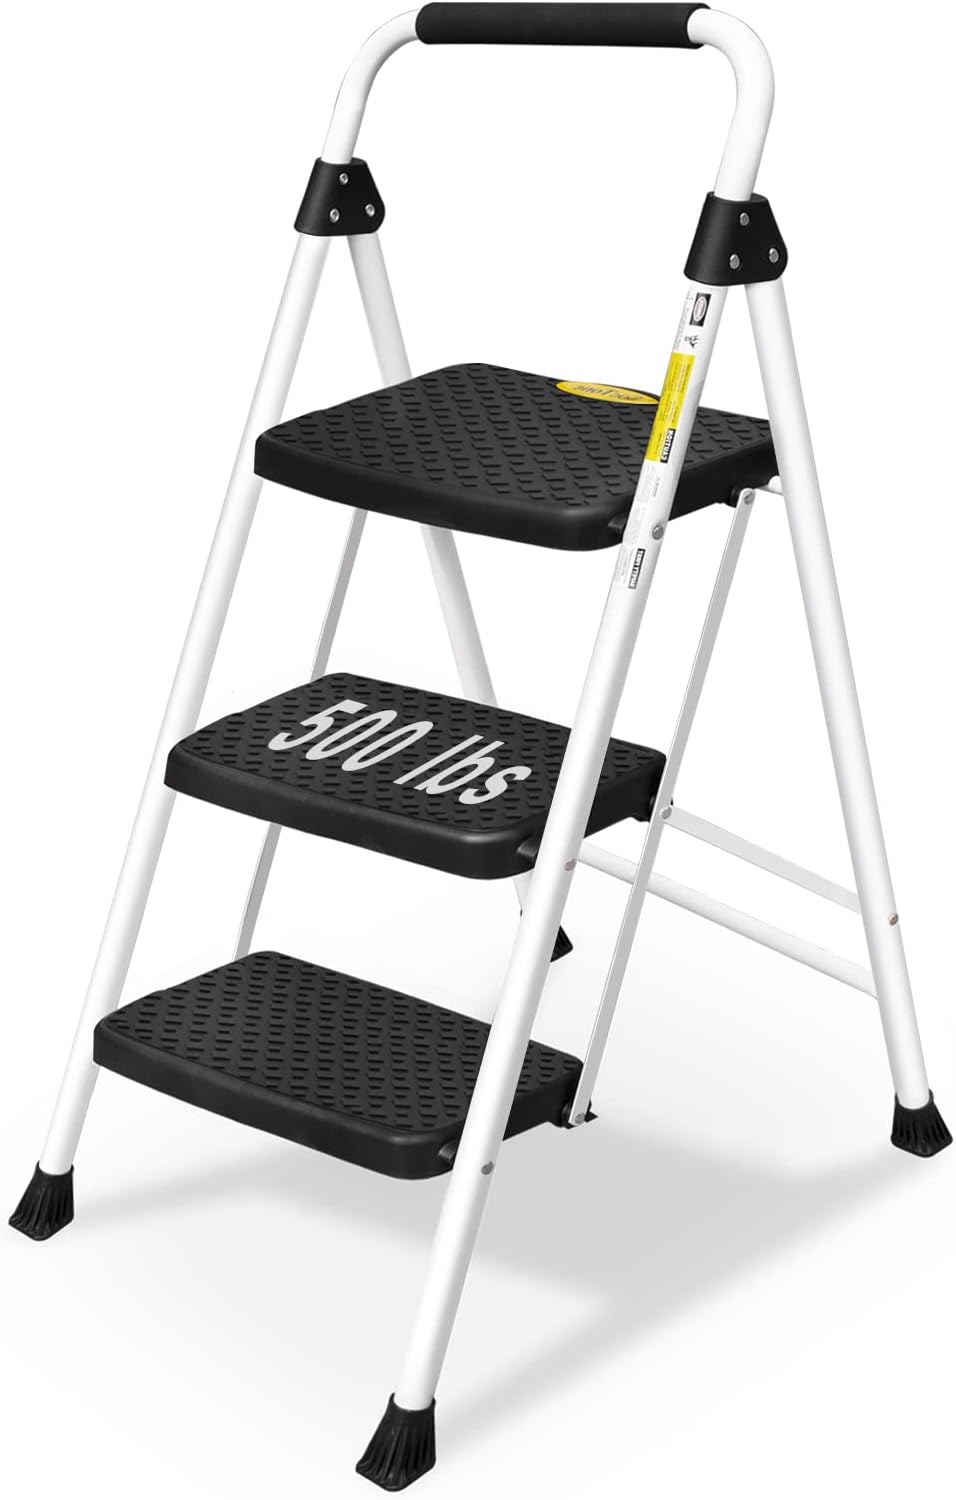 HBTower 3 Step Ladder, Folding Step Stool with Unique Snap-Lock Design, 500 lb. Capacity Sturdy Steel Ladder, Lightweight, Portable Ste